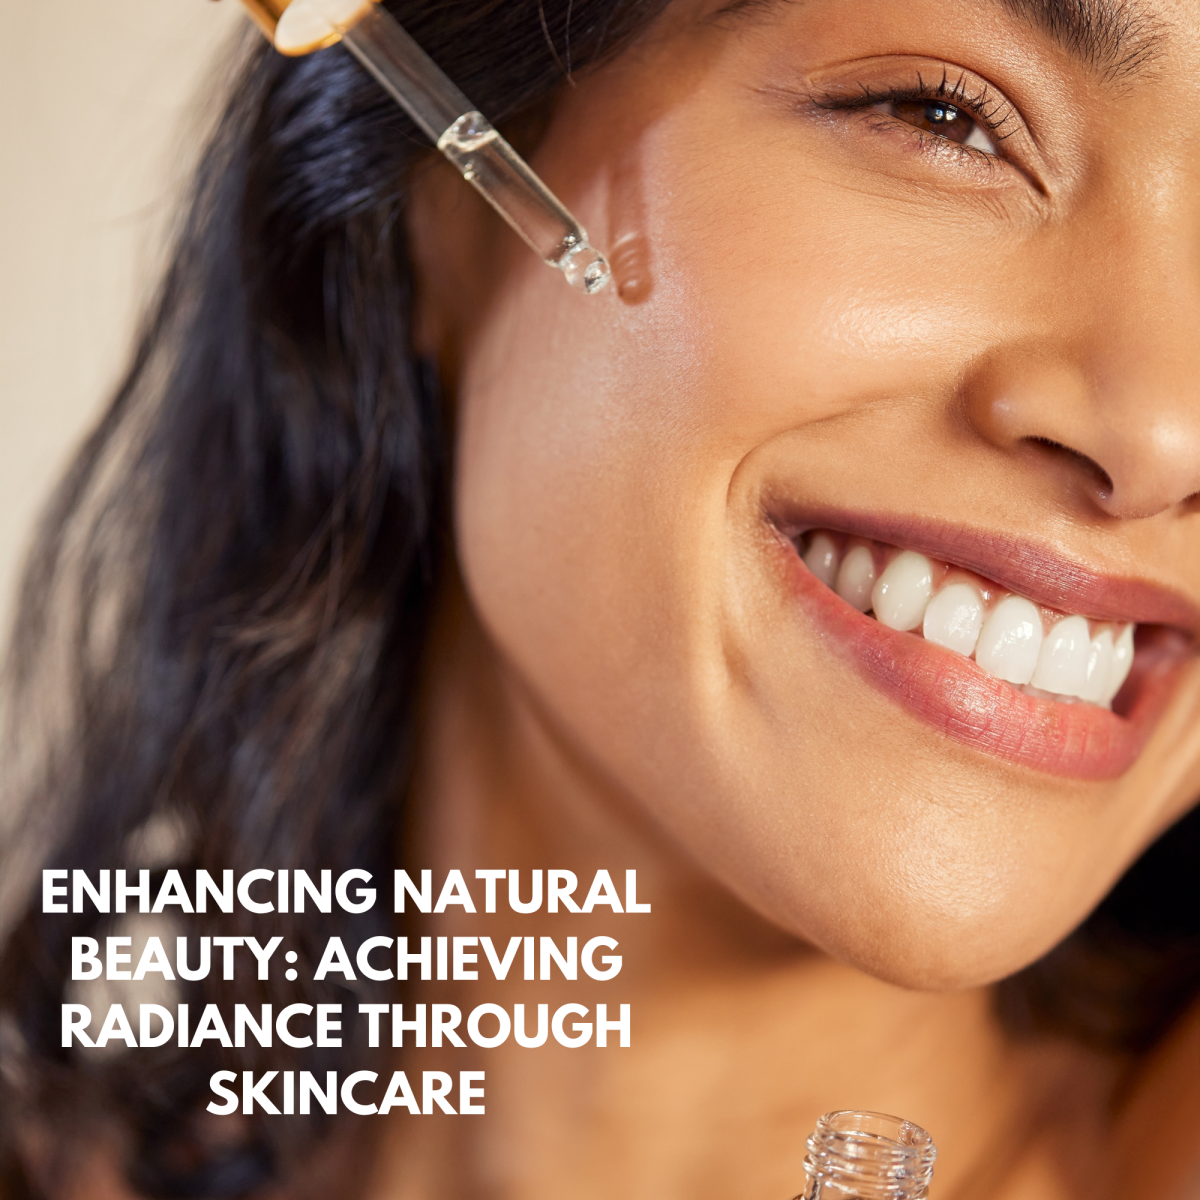 Enhancing Natural Beauty: Achieving Radiance Through Skincare